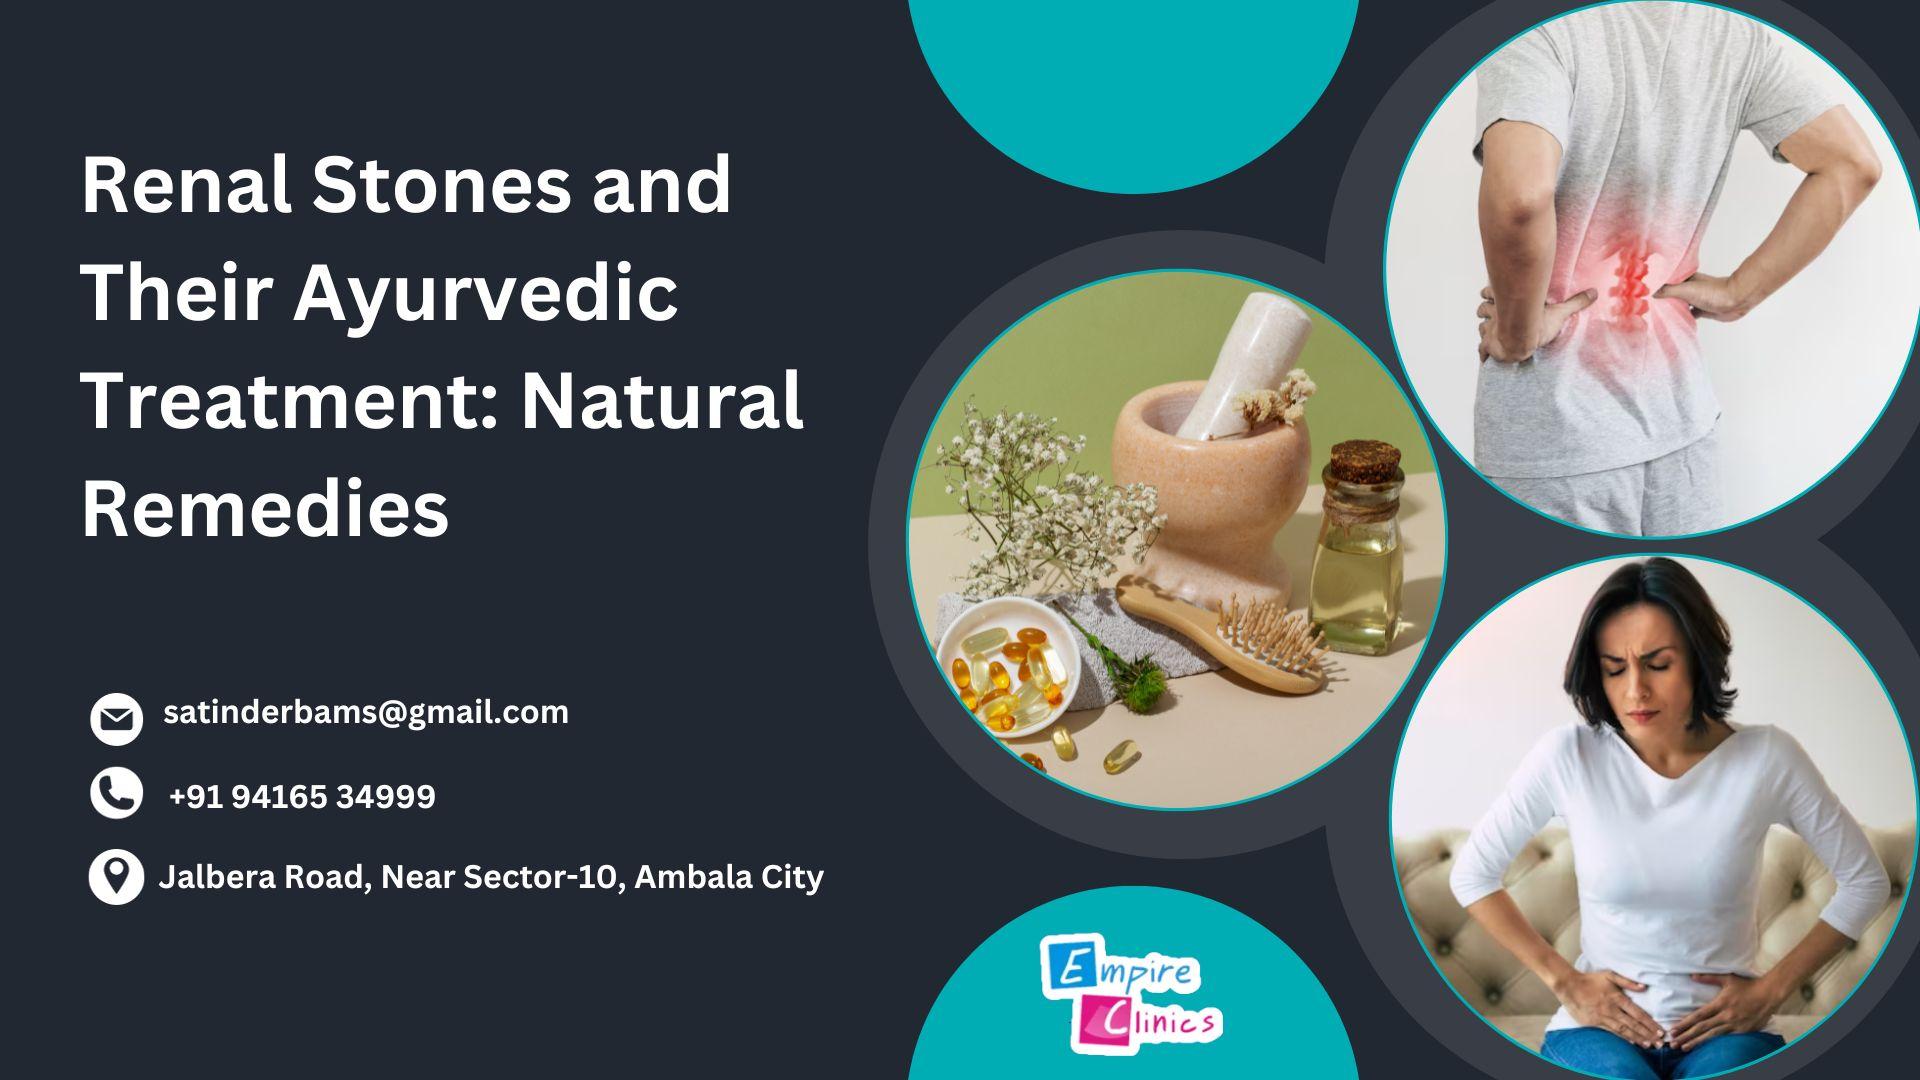 Renal Stones and Their Ayurvedic Treatment: Natural Remedies